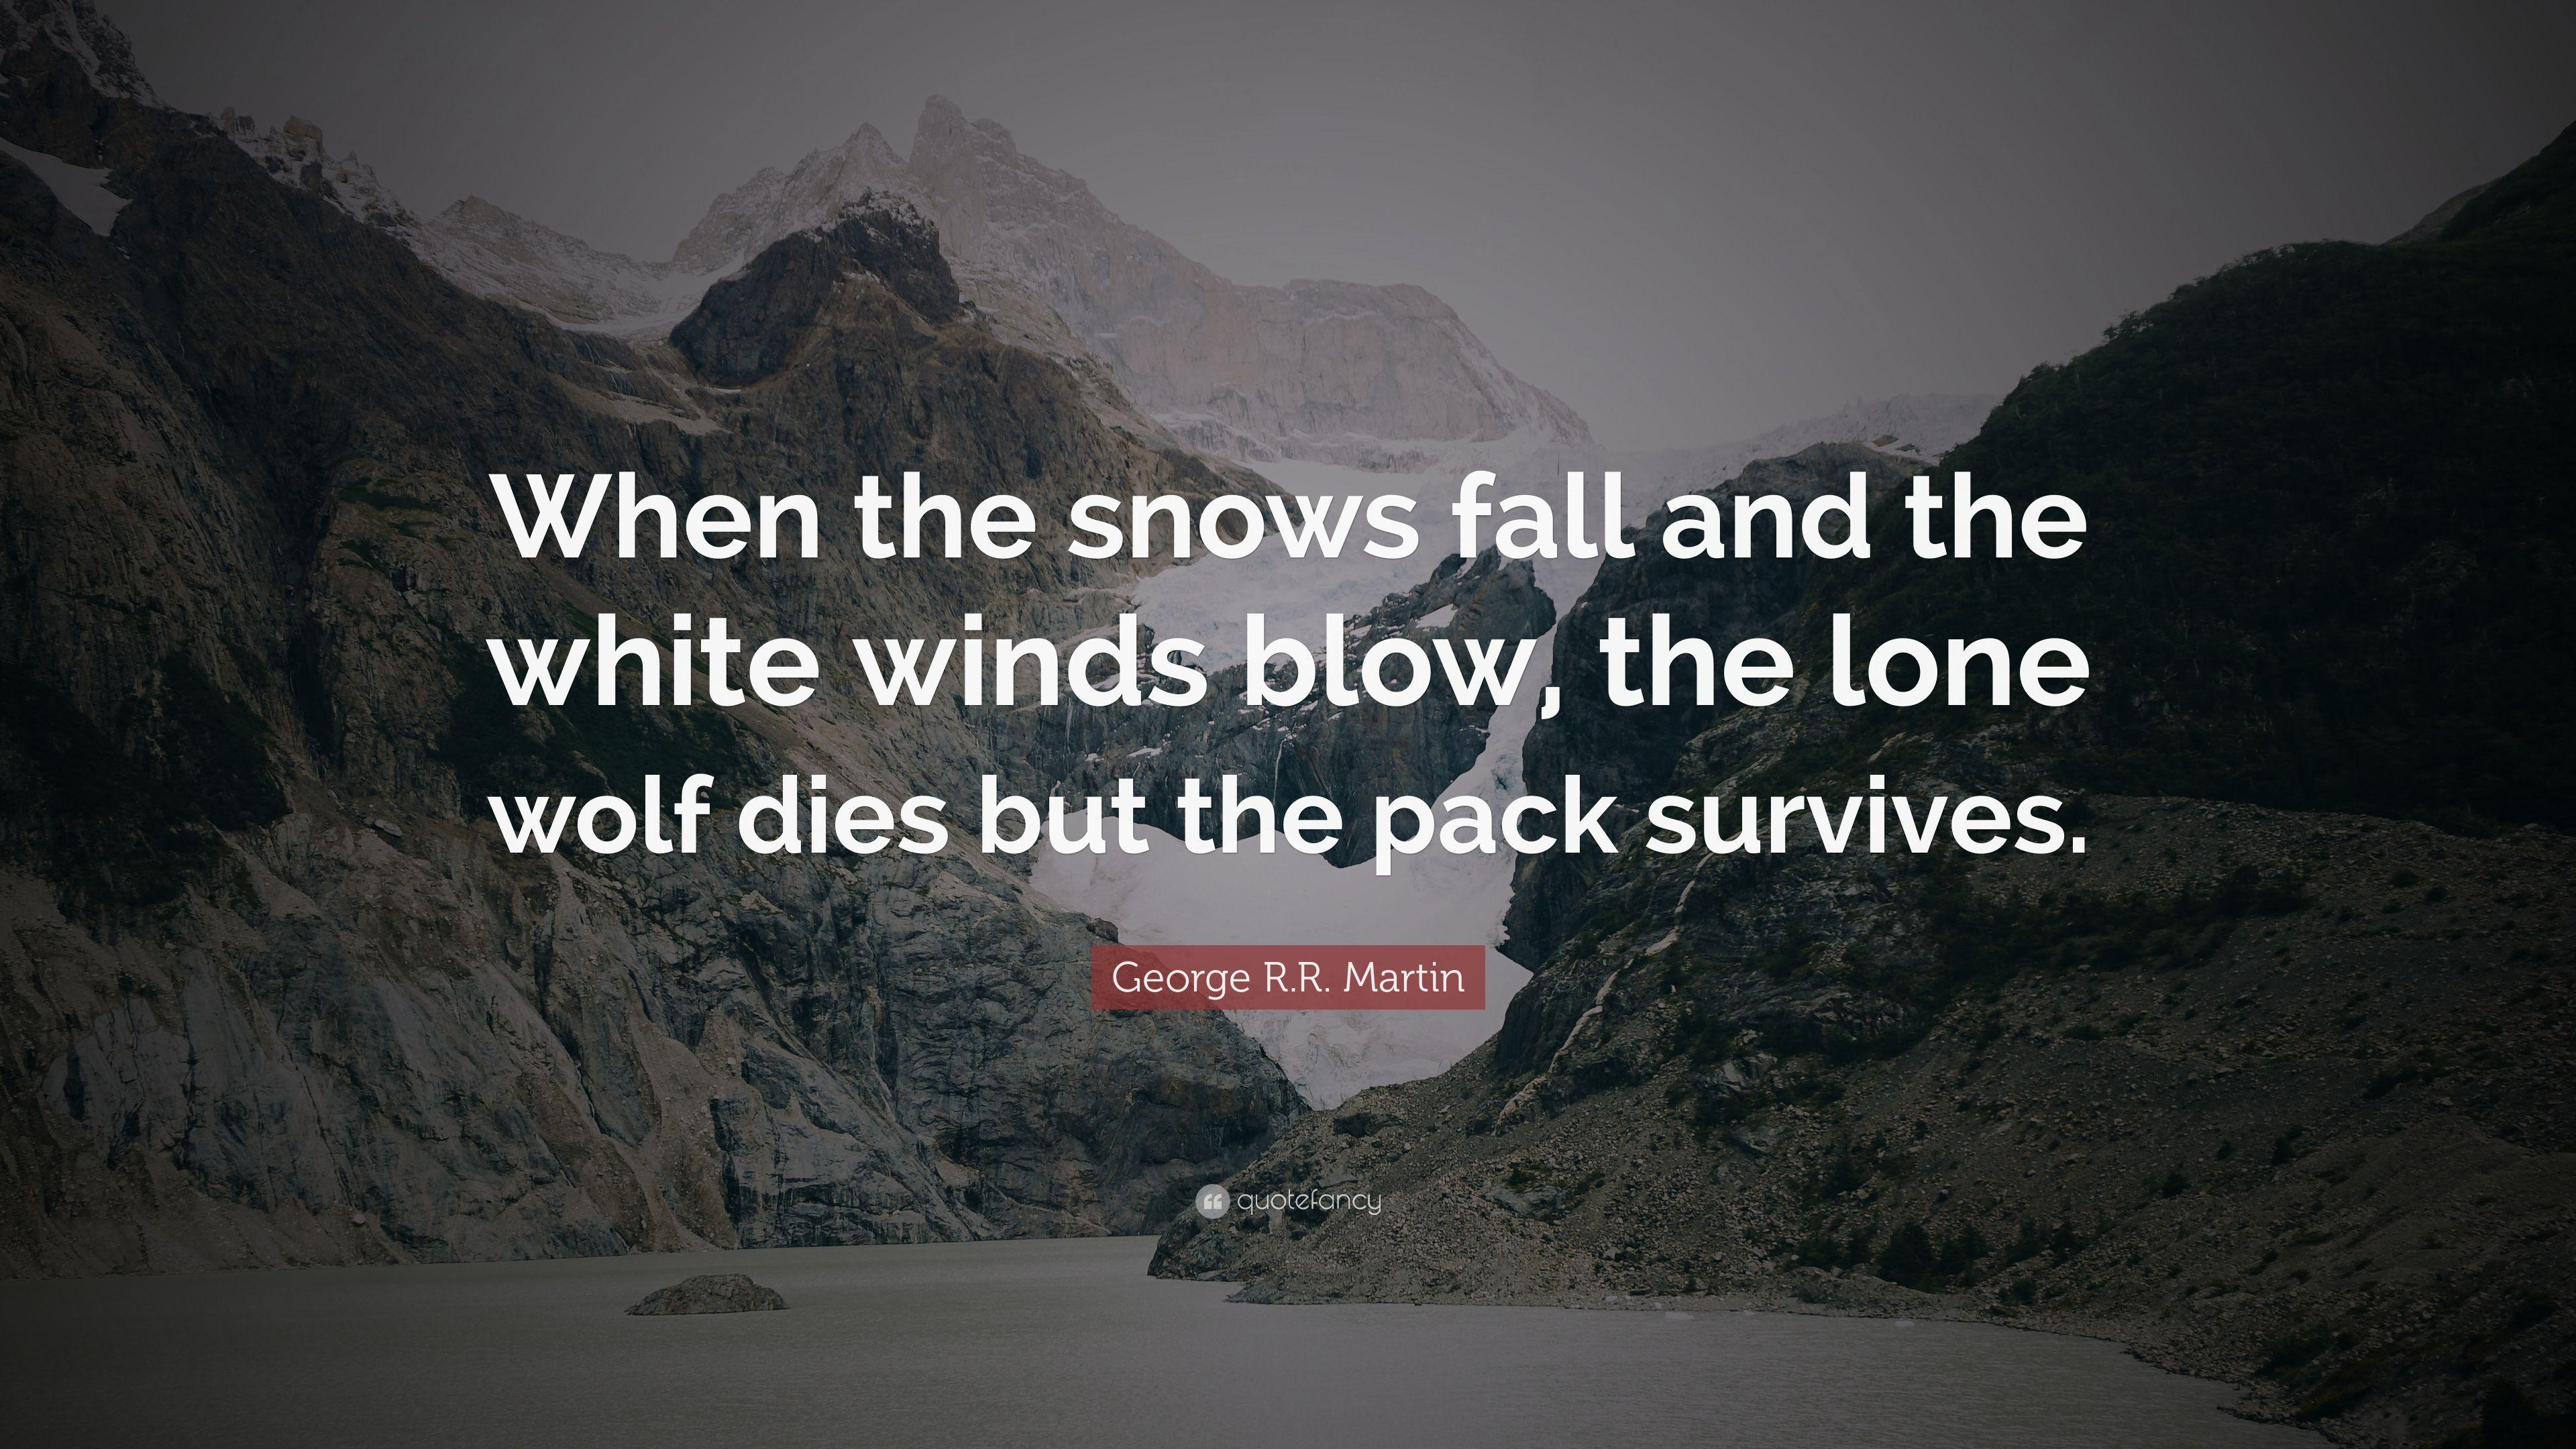 George R.R. Martin Quote: “When the snows fall and the white winds